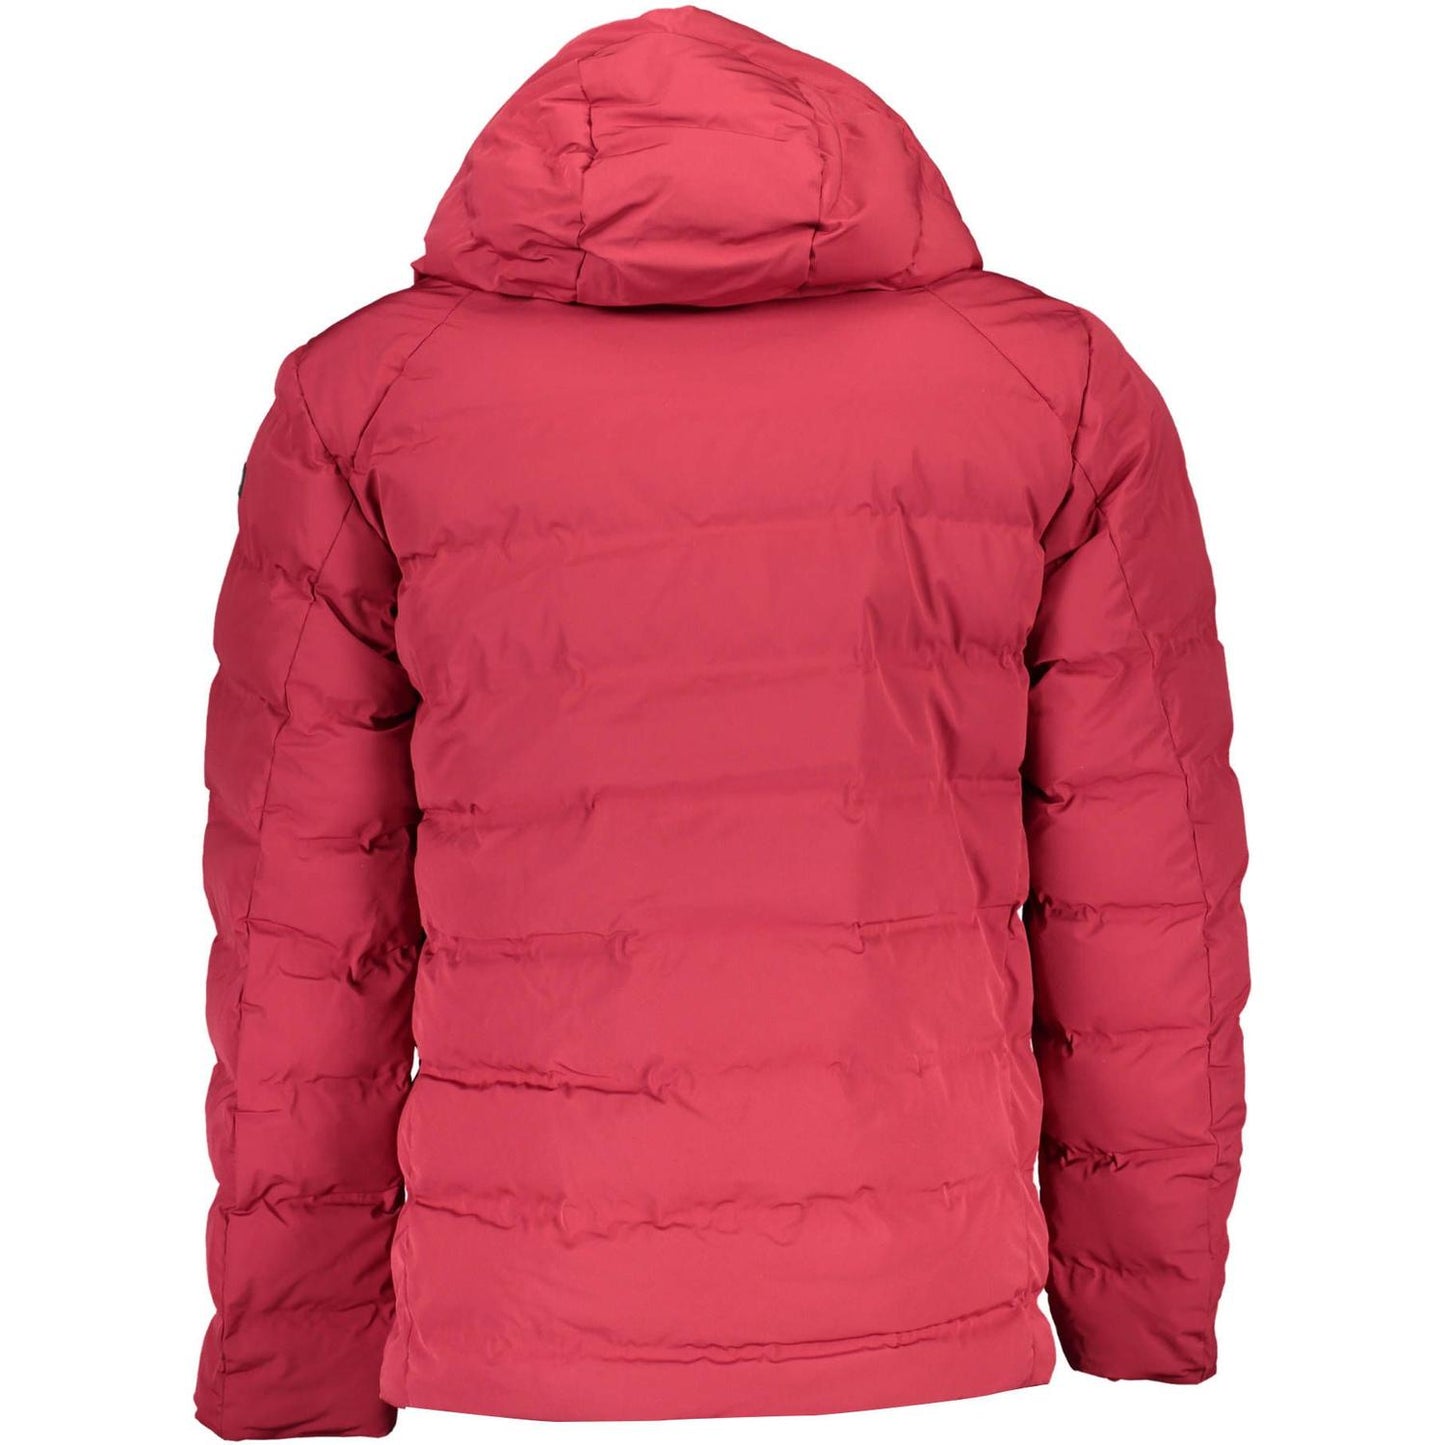 U.S. POLO ASSN. Chic Pink Hooded Jacket with Contrasting Details chic-pink-hooded-jacket-with-contrasting-details